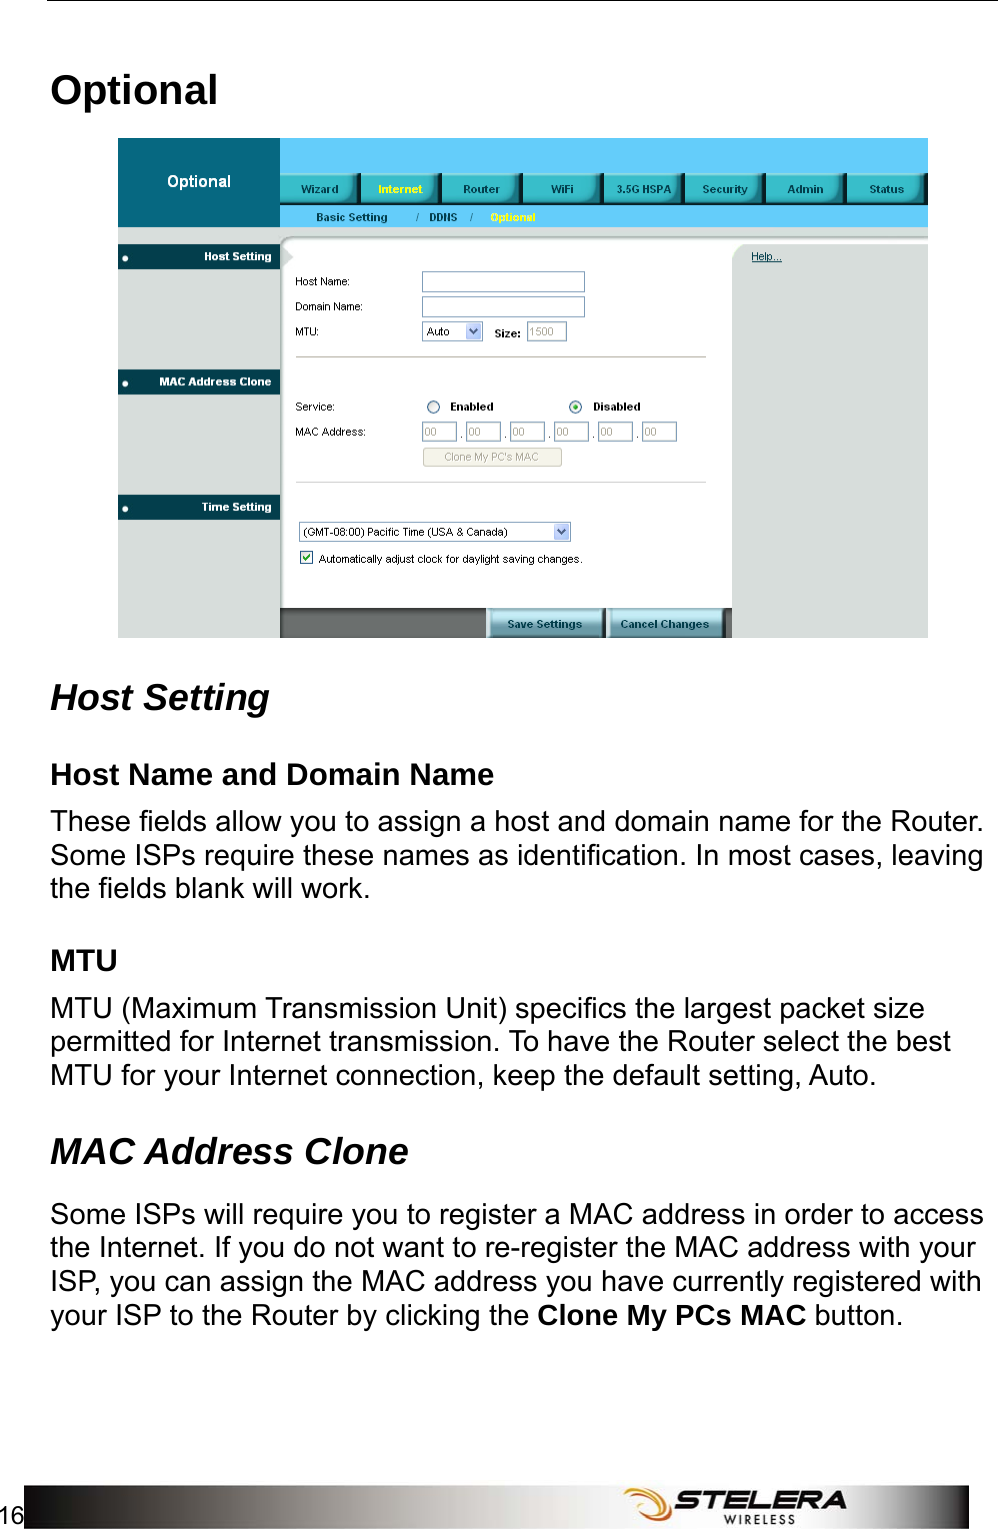 Internet Setup 16   Optional  Host Setting Host Name and Domain Name These fields allow you to assign a host and domain name for the Router. Some ISPs require these names as identification. In most cases, leaving the fields blank will work. MTU MTU (Maximum Transmission Unit) specifics the largest packet size permitted for Internet transmission. To have the Router select the best MTU for your Internet connection, keep the default setting, Auto. MAC Address Clone  Some ISPs will require you to register a MAC address in order to access the Internet. If you do not want to re-register the MAC address with your ISP, you can assign the MAC address you have currently registered with your ISP to the Router by clicking the Clone My PCs MAC button. 